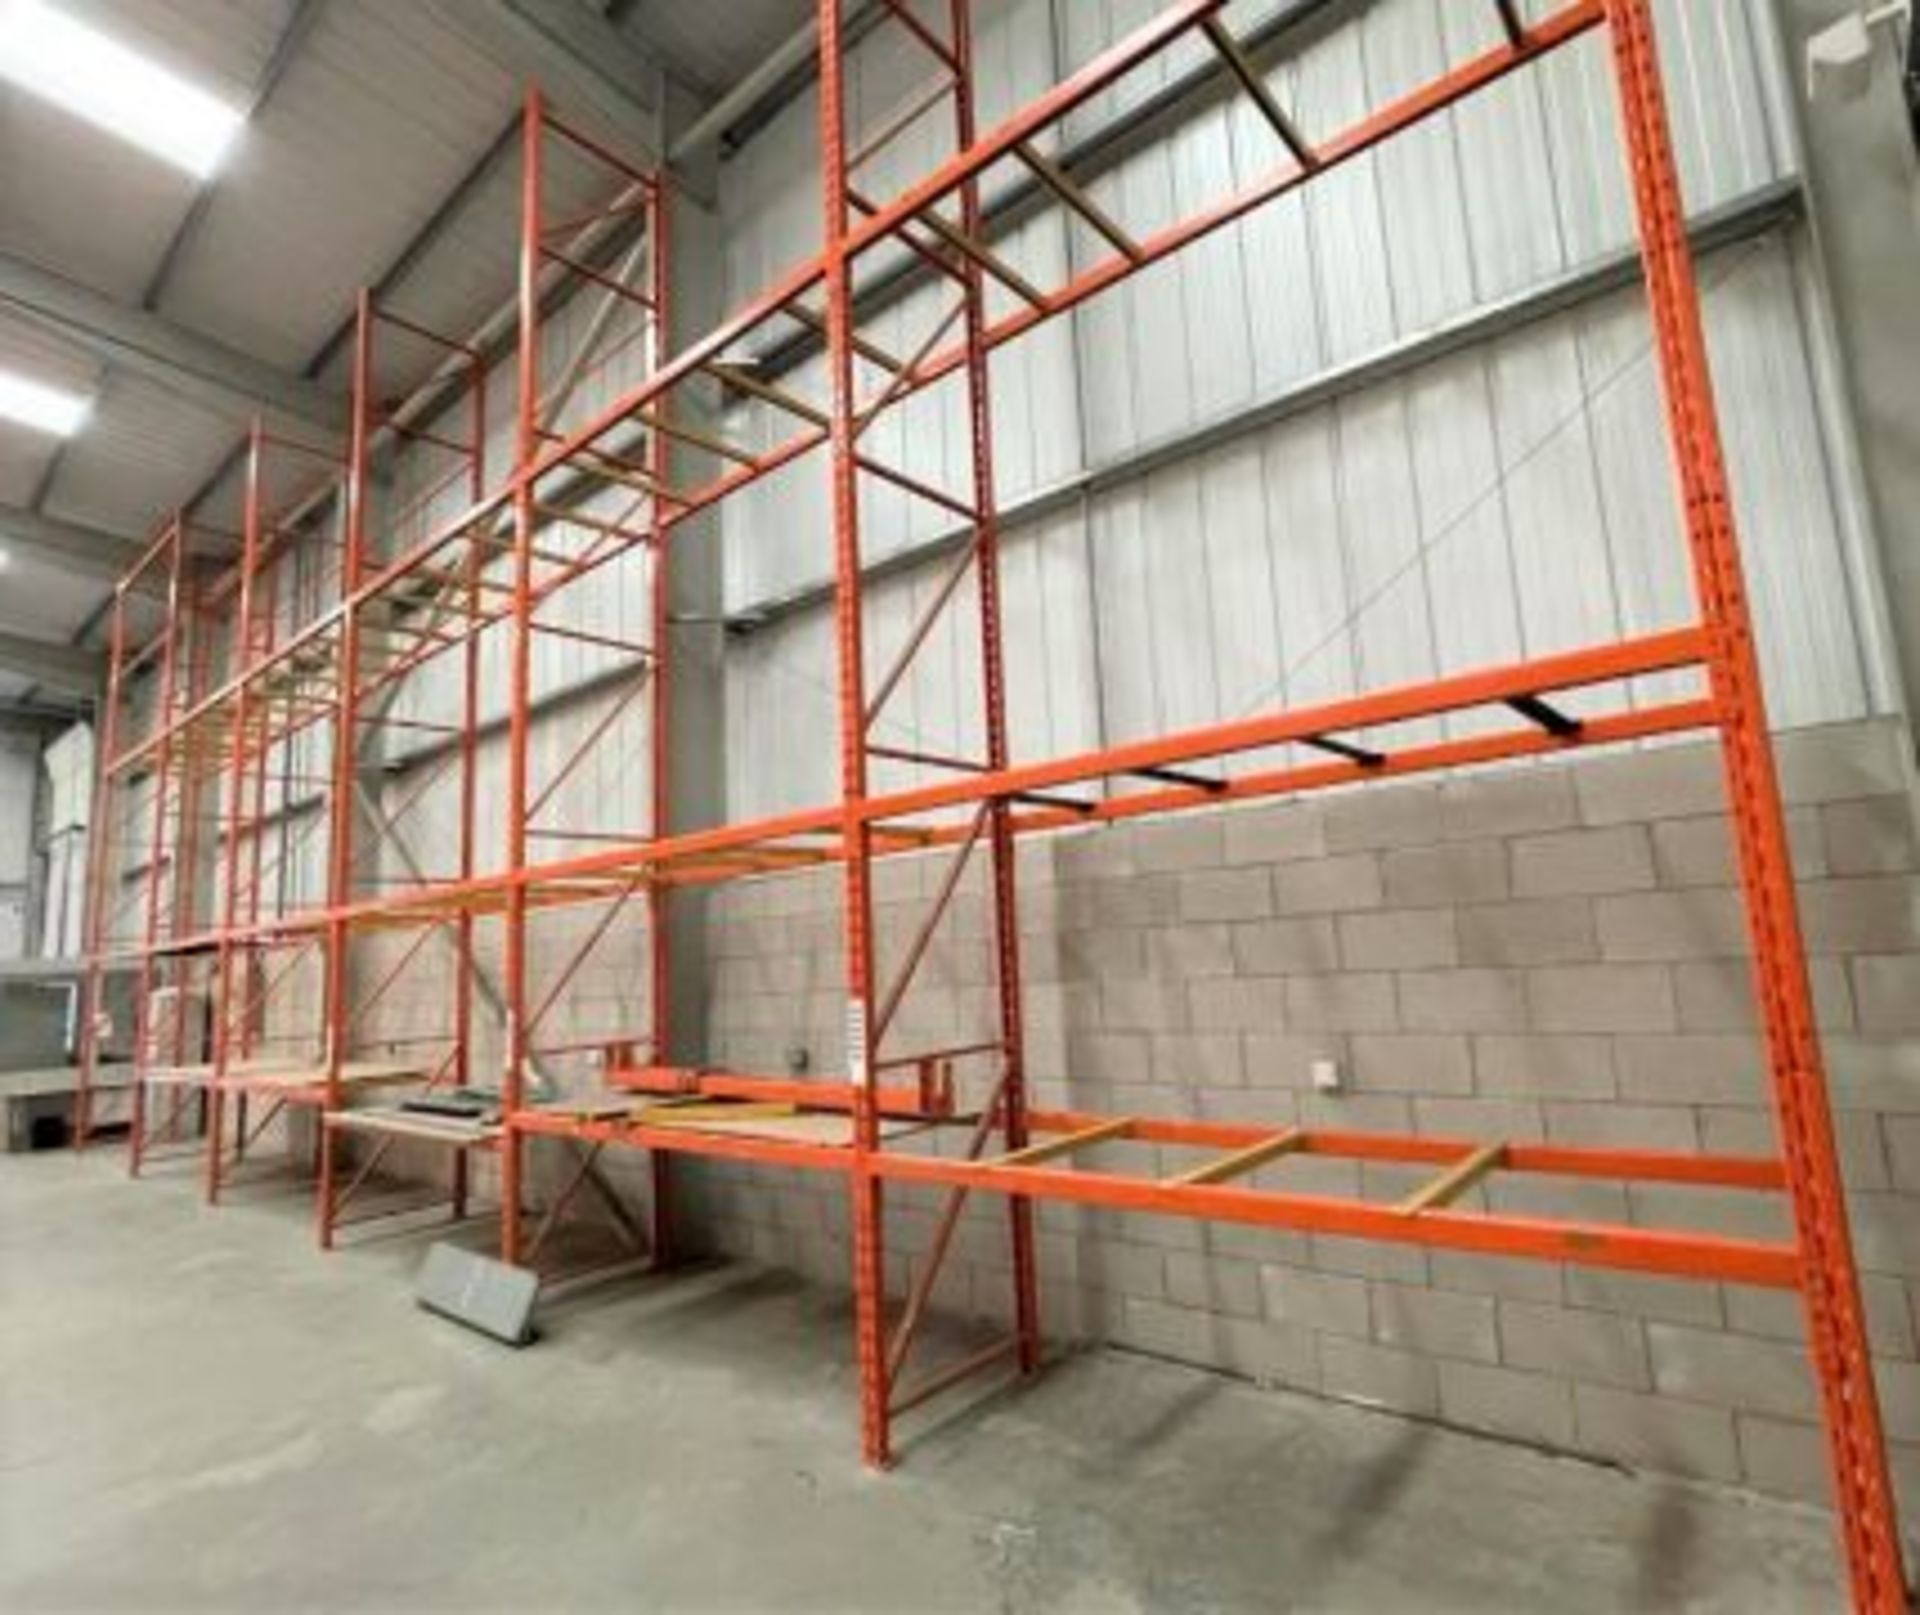 6 x Bays of RediRack Warehouse PALLET RACKING - Lot Includes 7 x Uprights and 24 x Crossbeams -